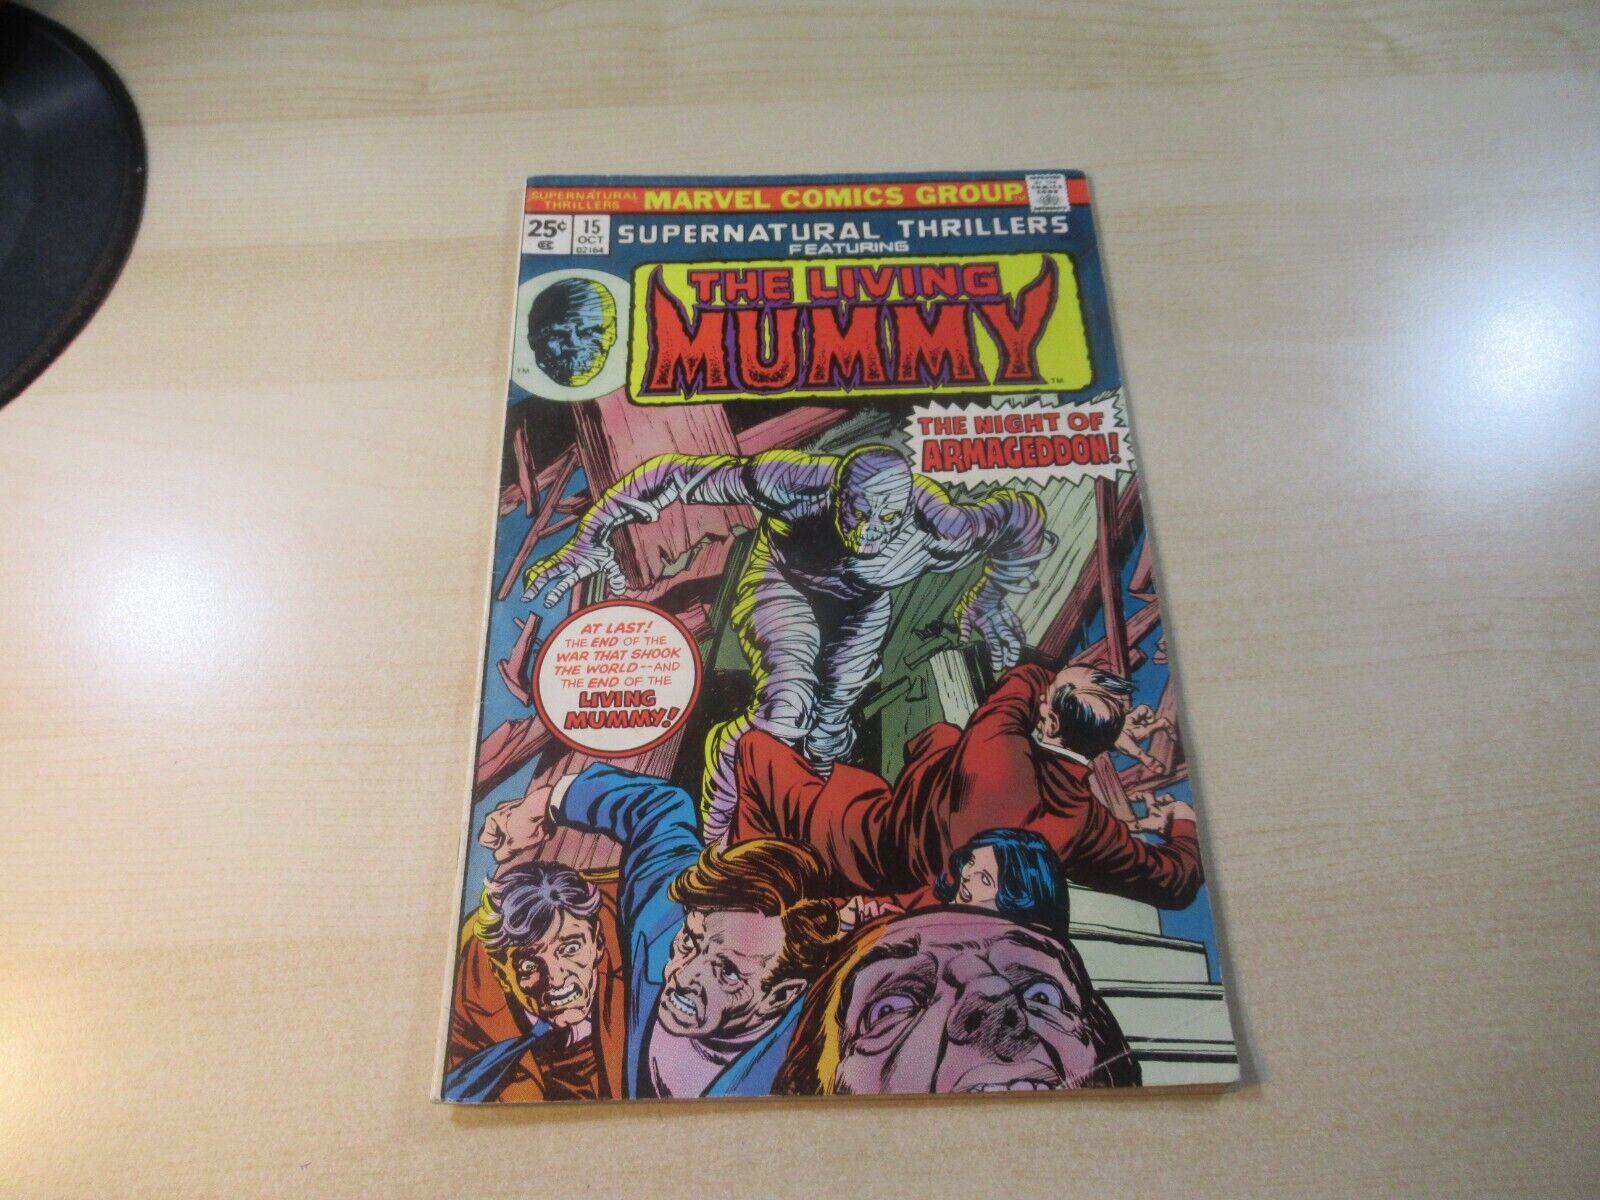 SUPERNATURAL THRILLERS #15 MARVEL BRONZE AGE LIVING MUMMY FINAL ISSUE OF SERIES